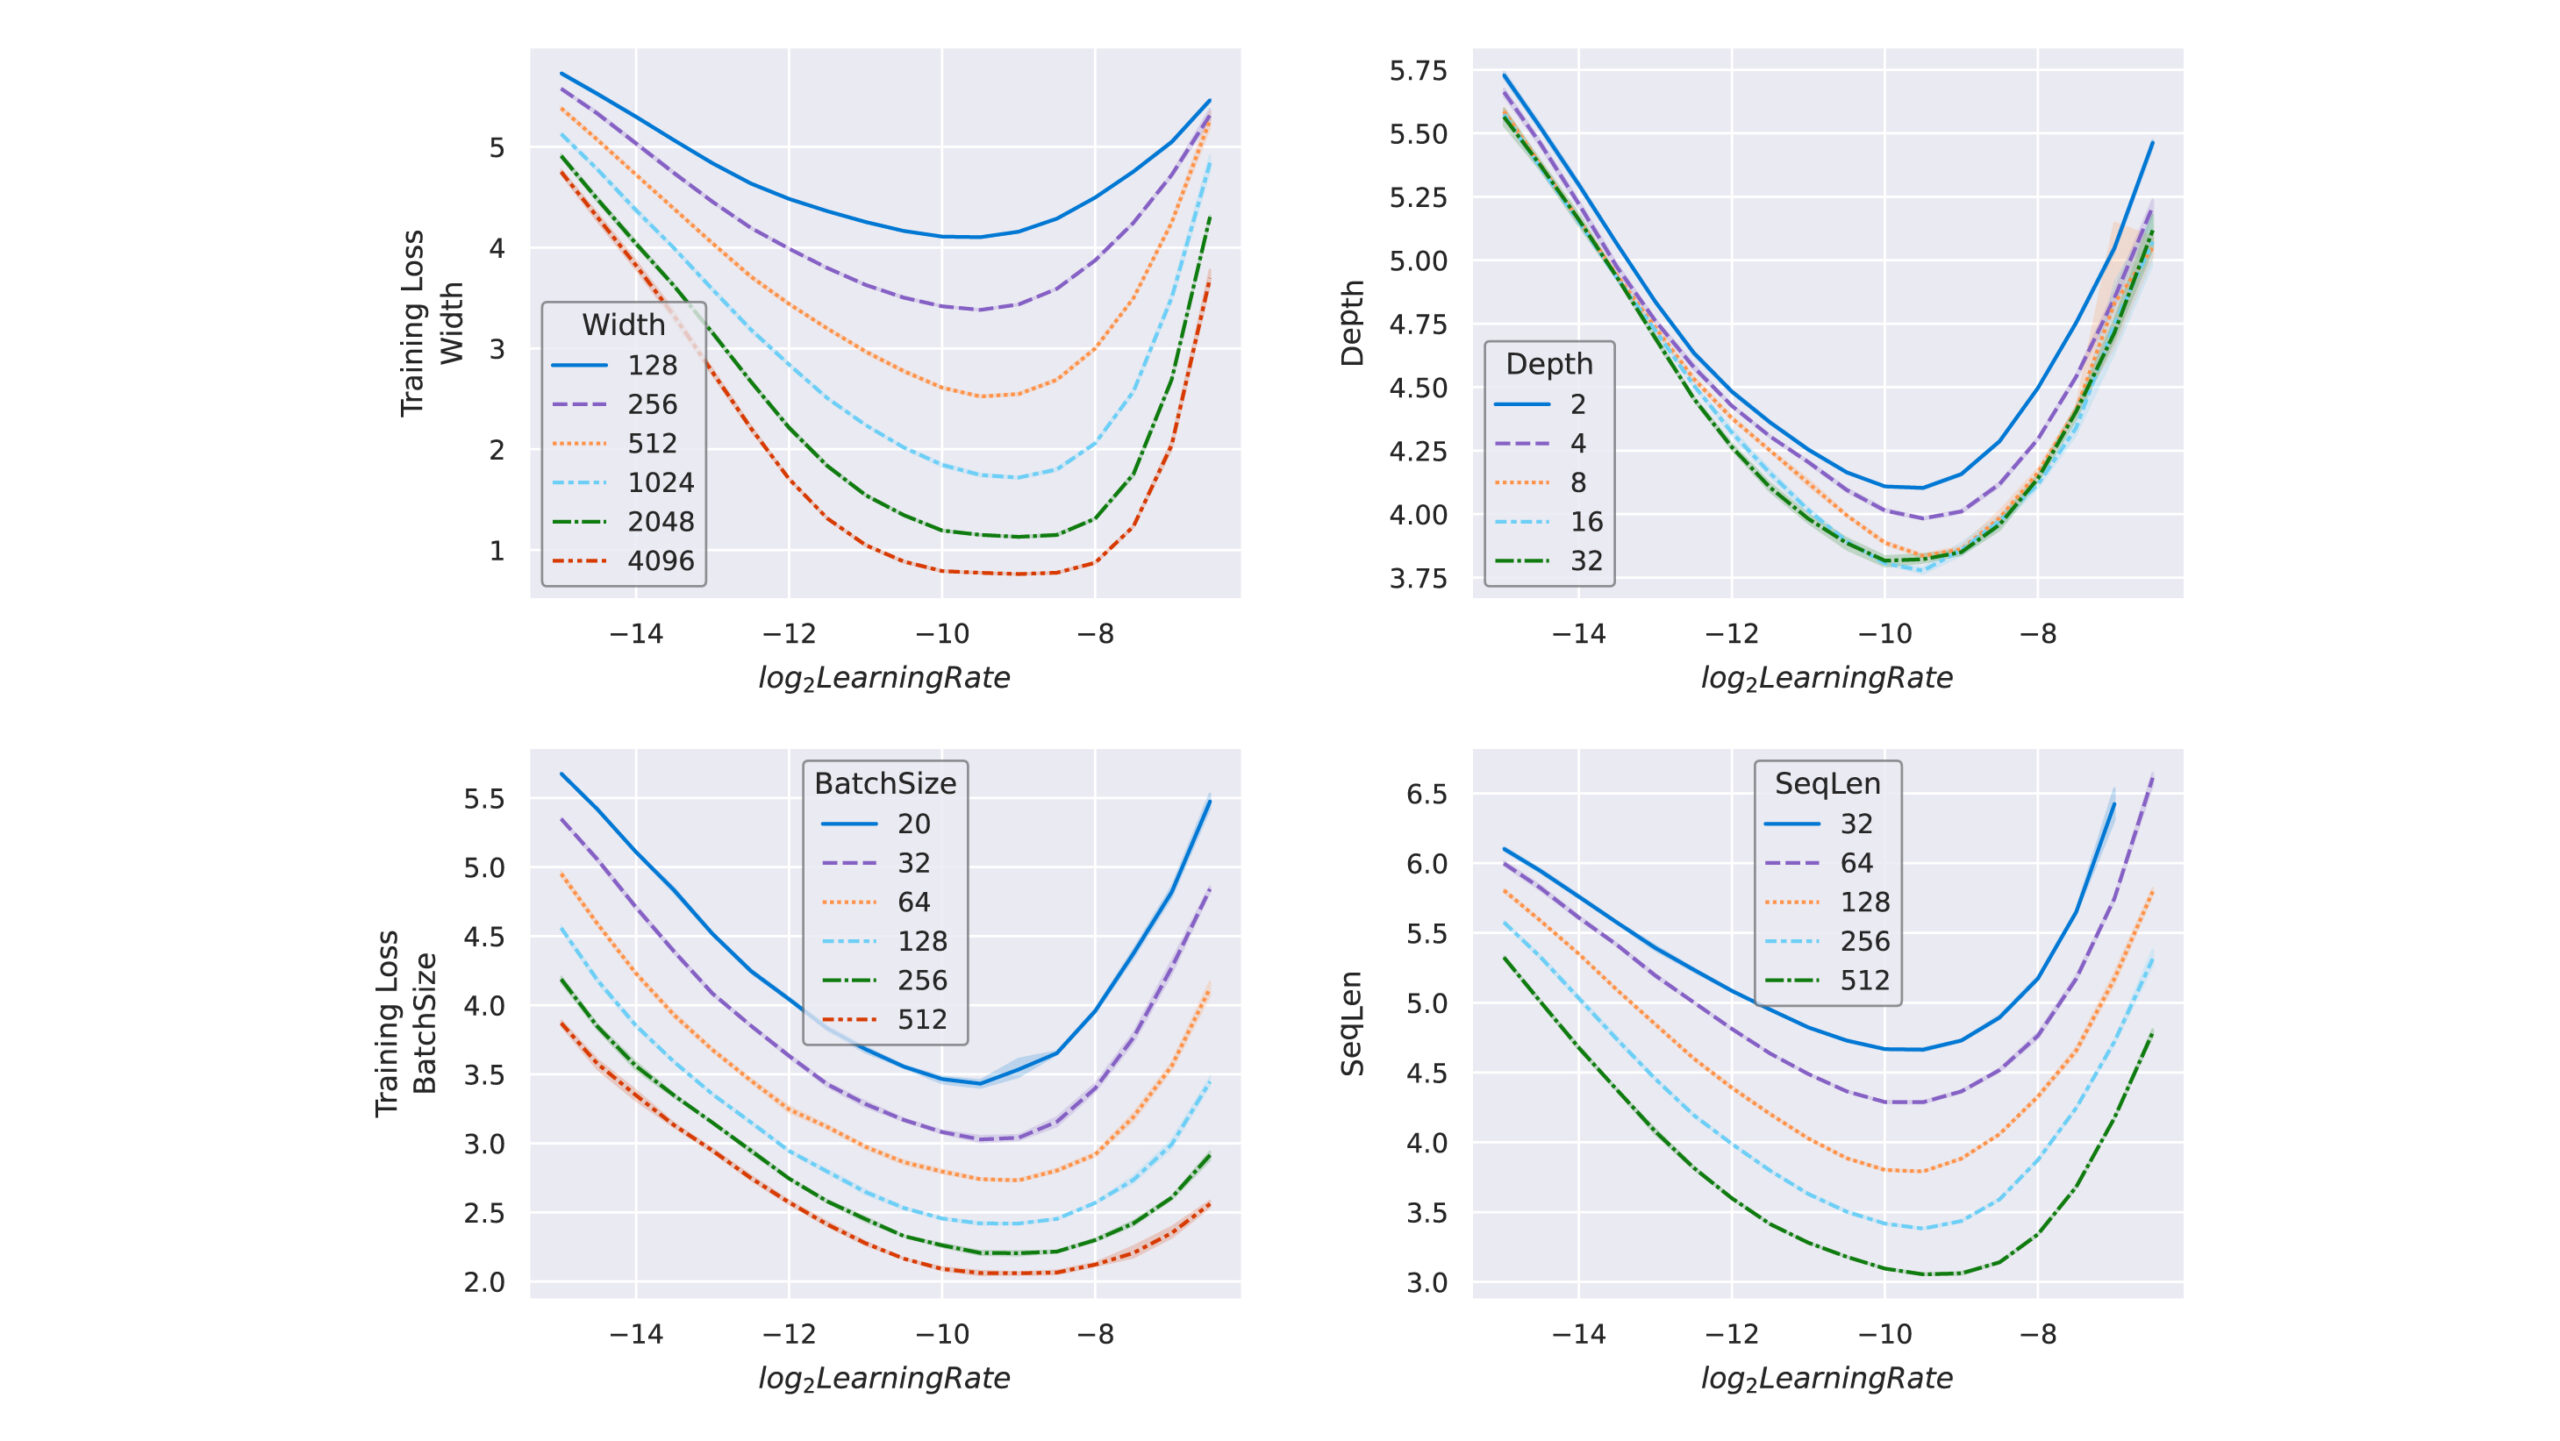 Four line-plots showing the stability of the optimal learning rate across width, depth, batch size, and sequence length. The width is varied from 128 to 4,096, the depth from 2 to 32, the batch size from 20 to 512, and the sequence length from 32 to 512. 